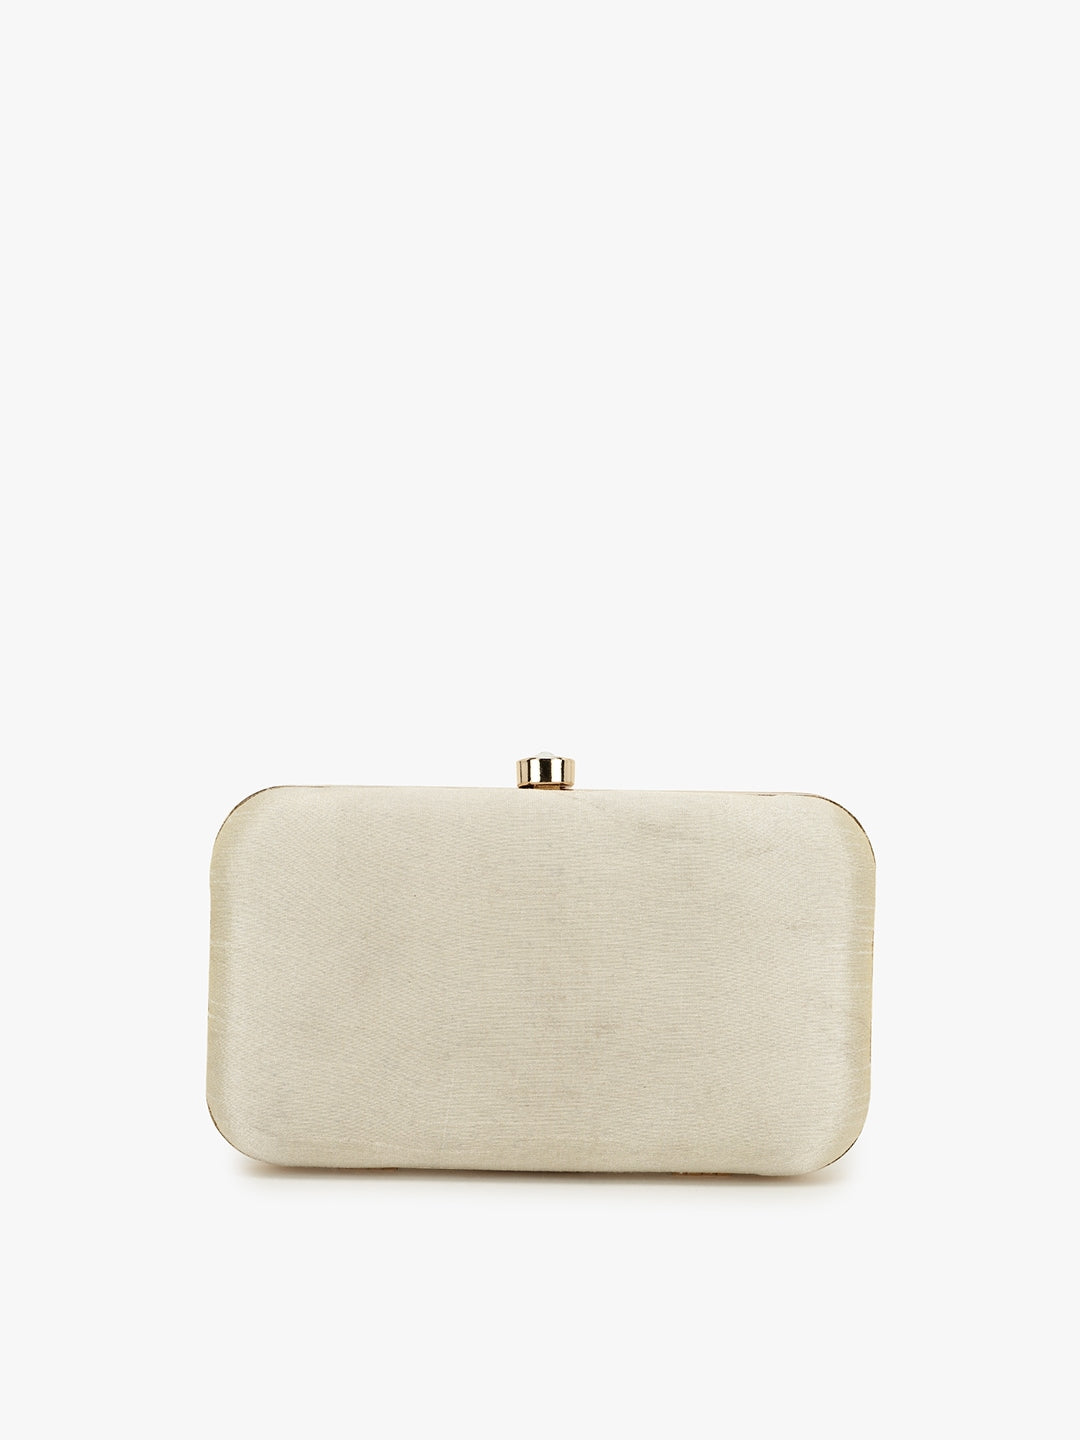 Anekaant Off White & Gold-Toned Embellished Box Clutch - Distacart